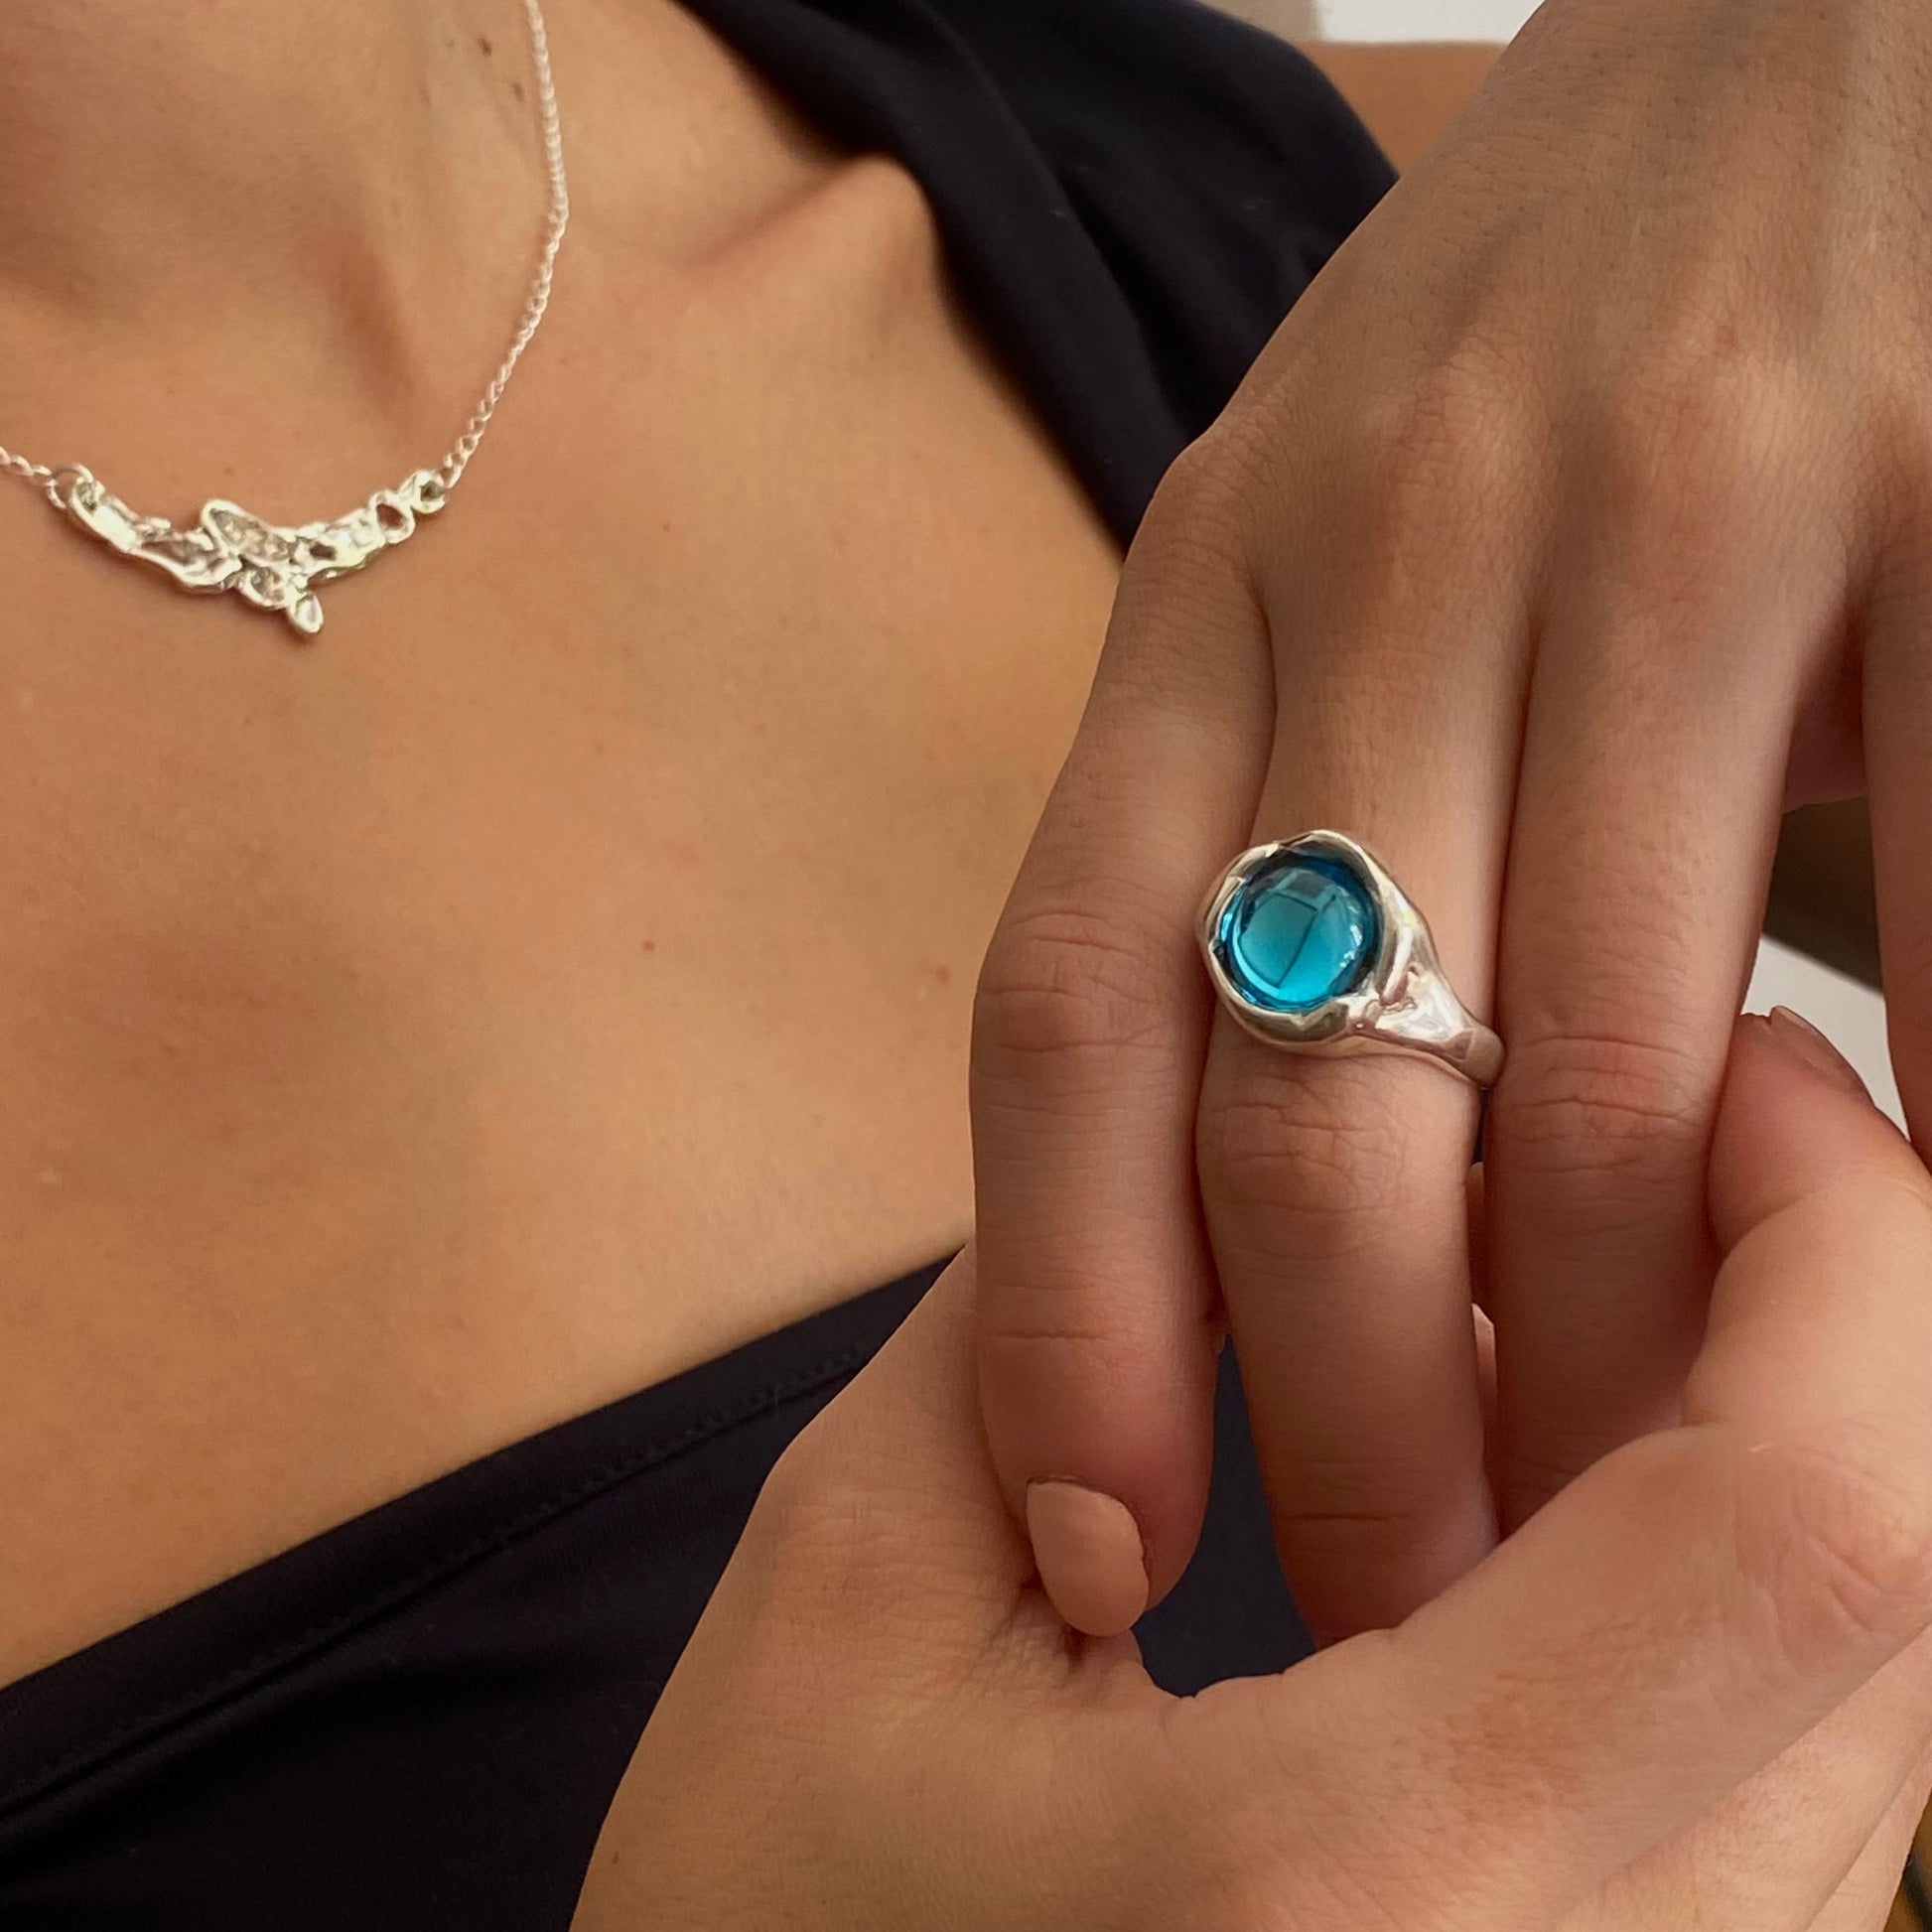 The Flor ring is a handmade piece made of 925 sterling silver. Its surface is raw and glossy